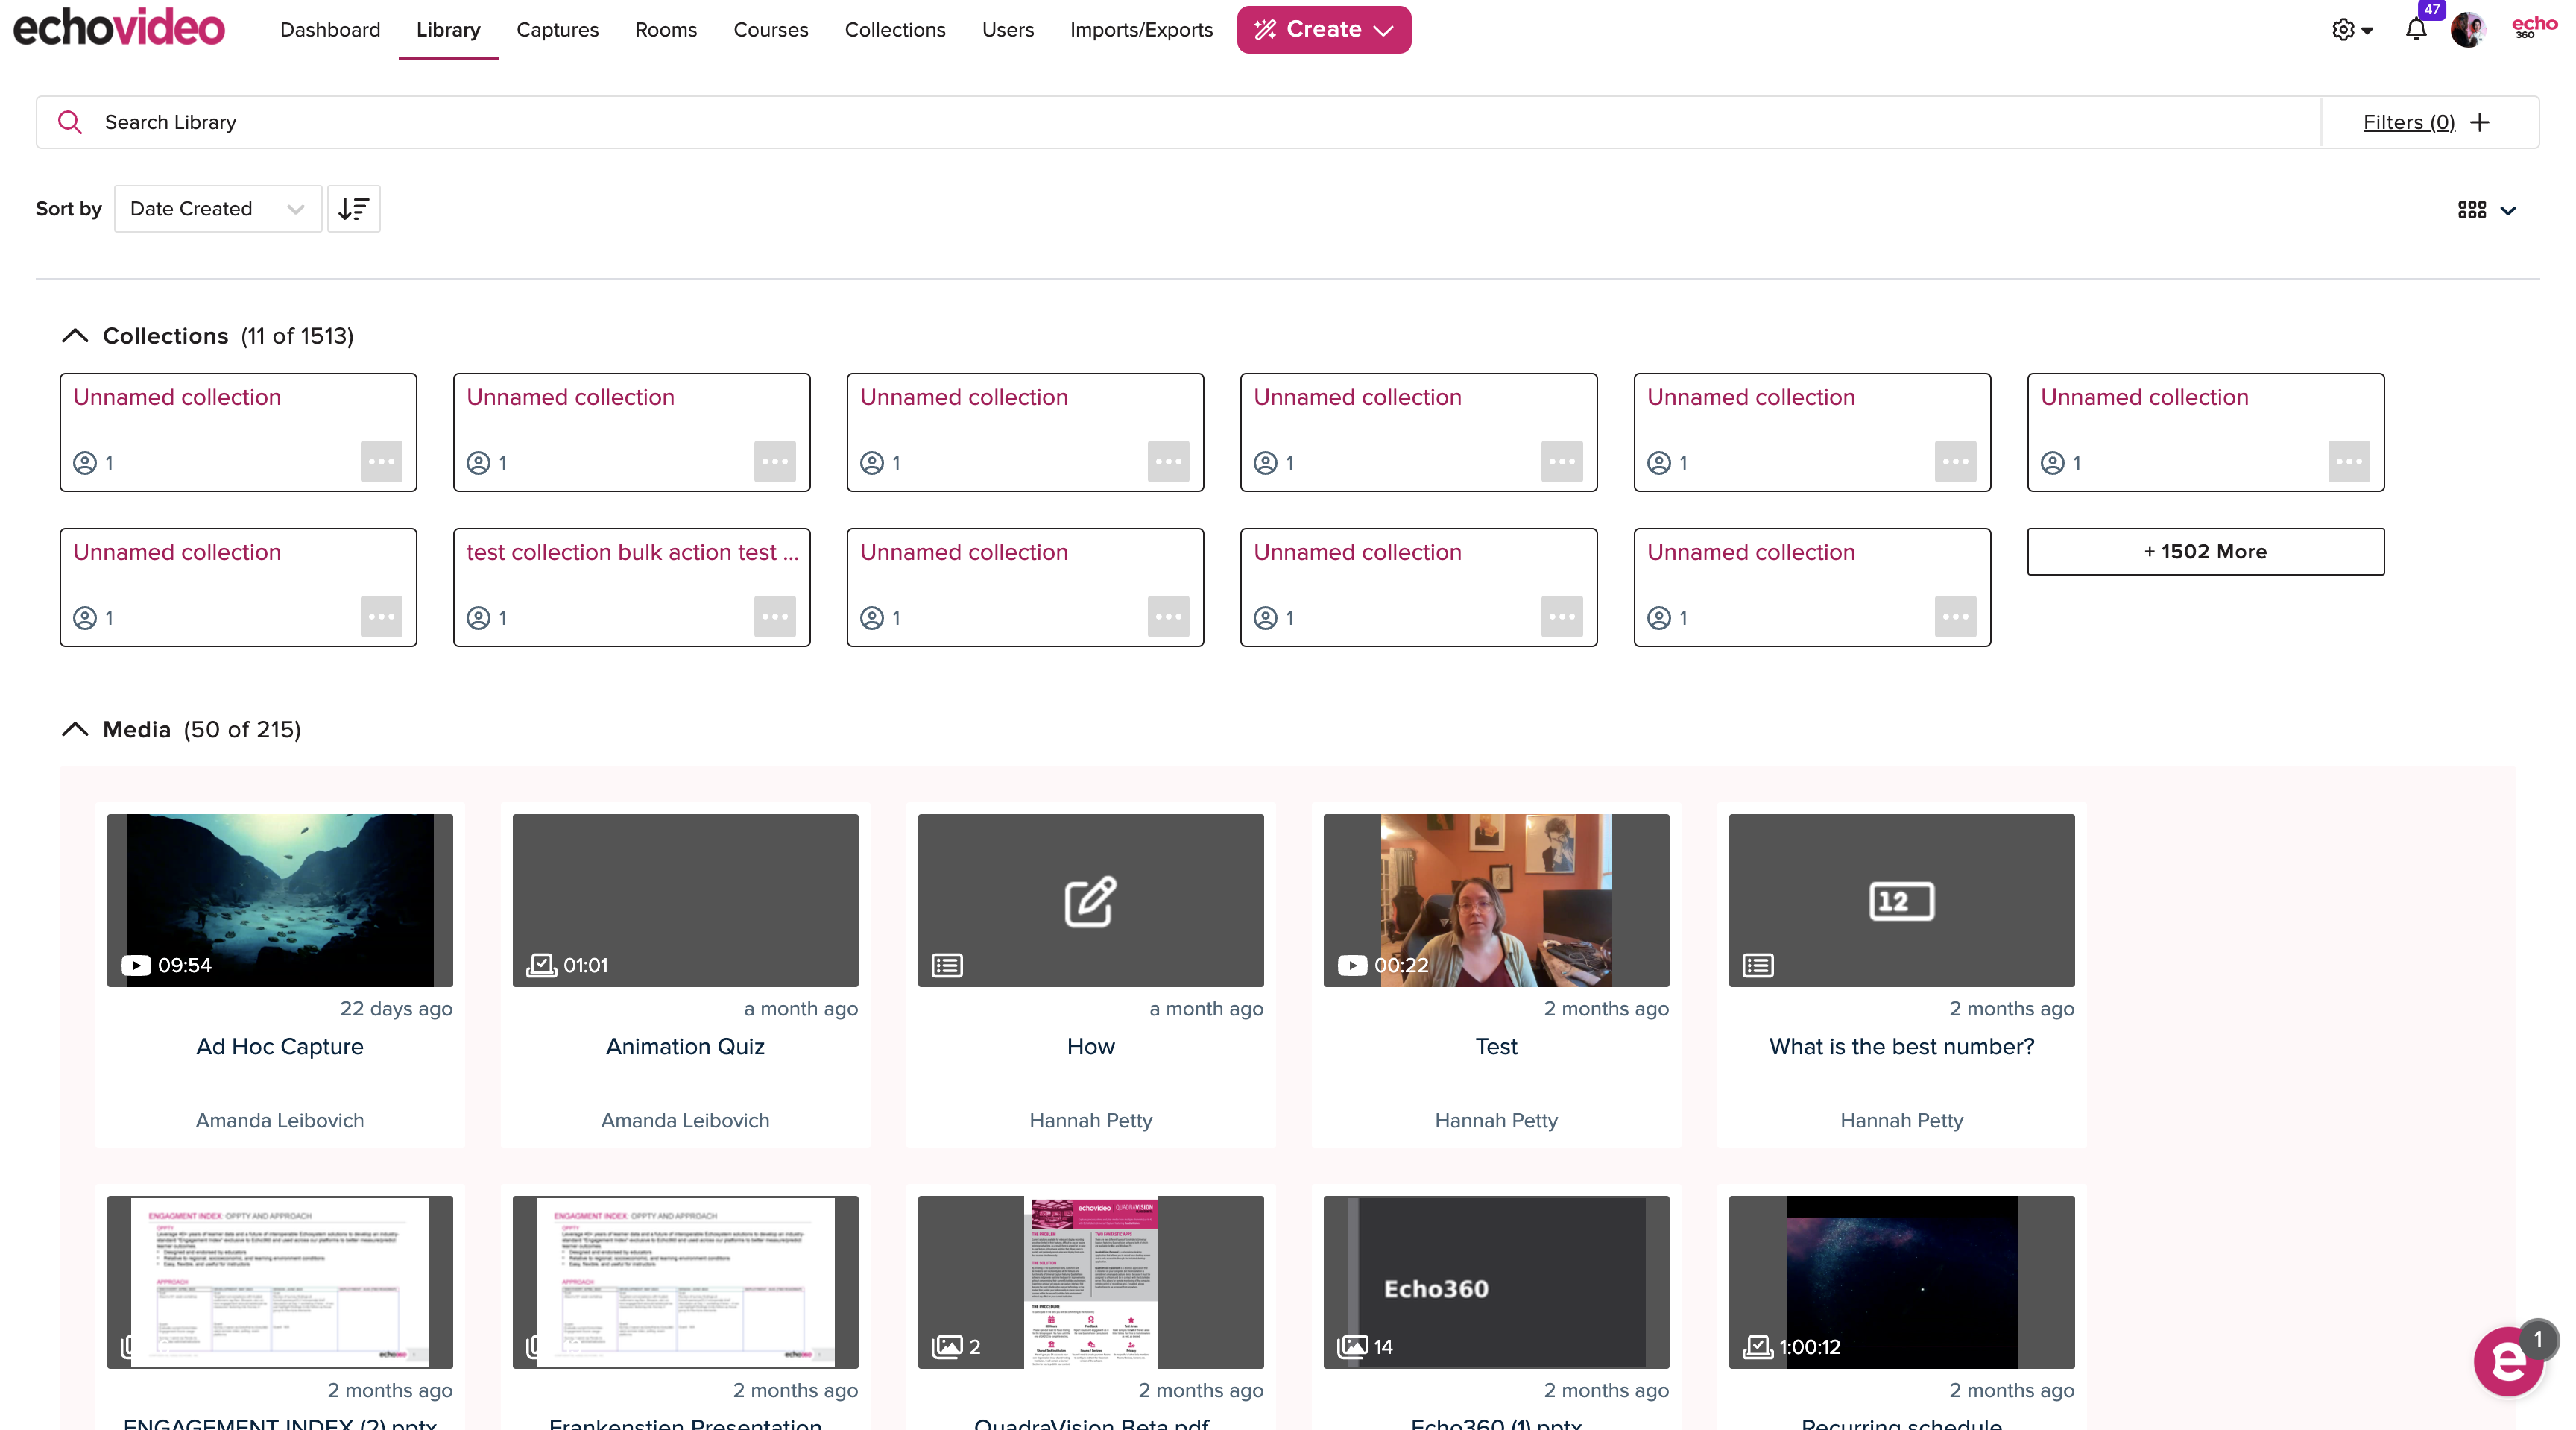 Admin Library page with raspberry pink branding as described